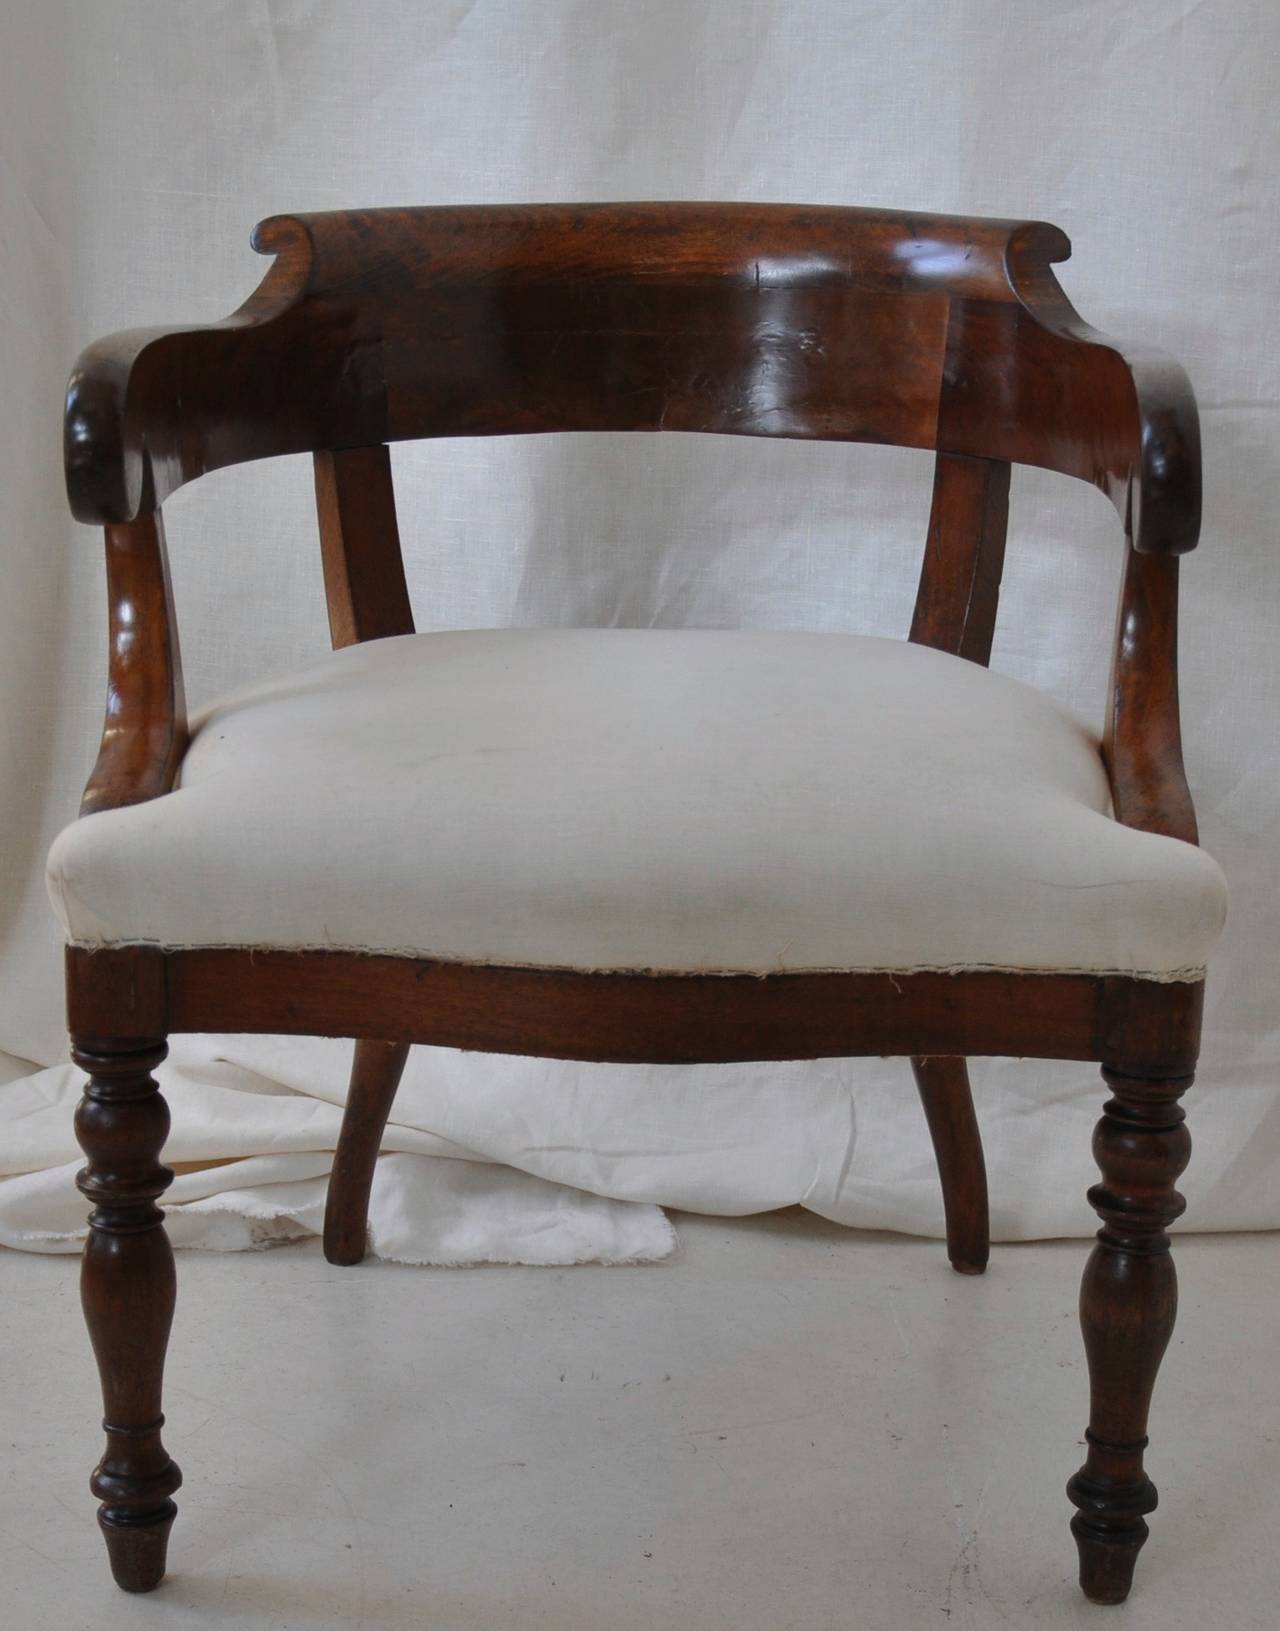 A French 19th century mahogany desk chair with concave back,
inscrolled arms and turned front legs in white muslin.
This chair is professionally restored in the traditional way with copper springs and horsehair through which very comfortable.